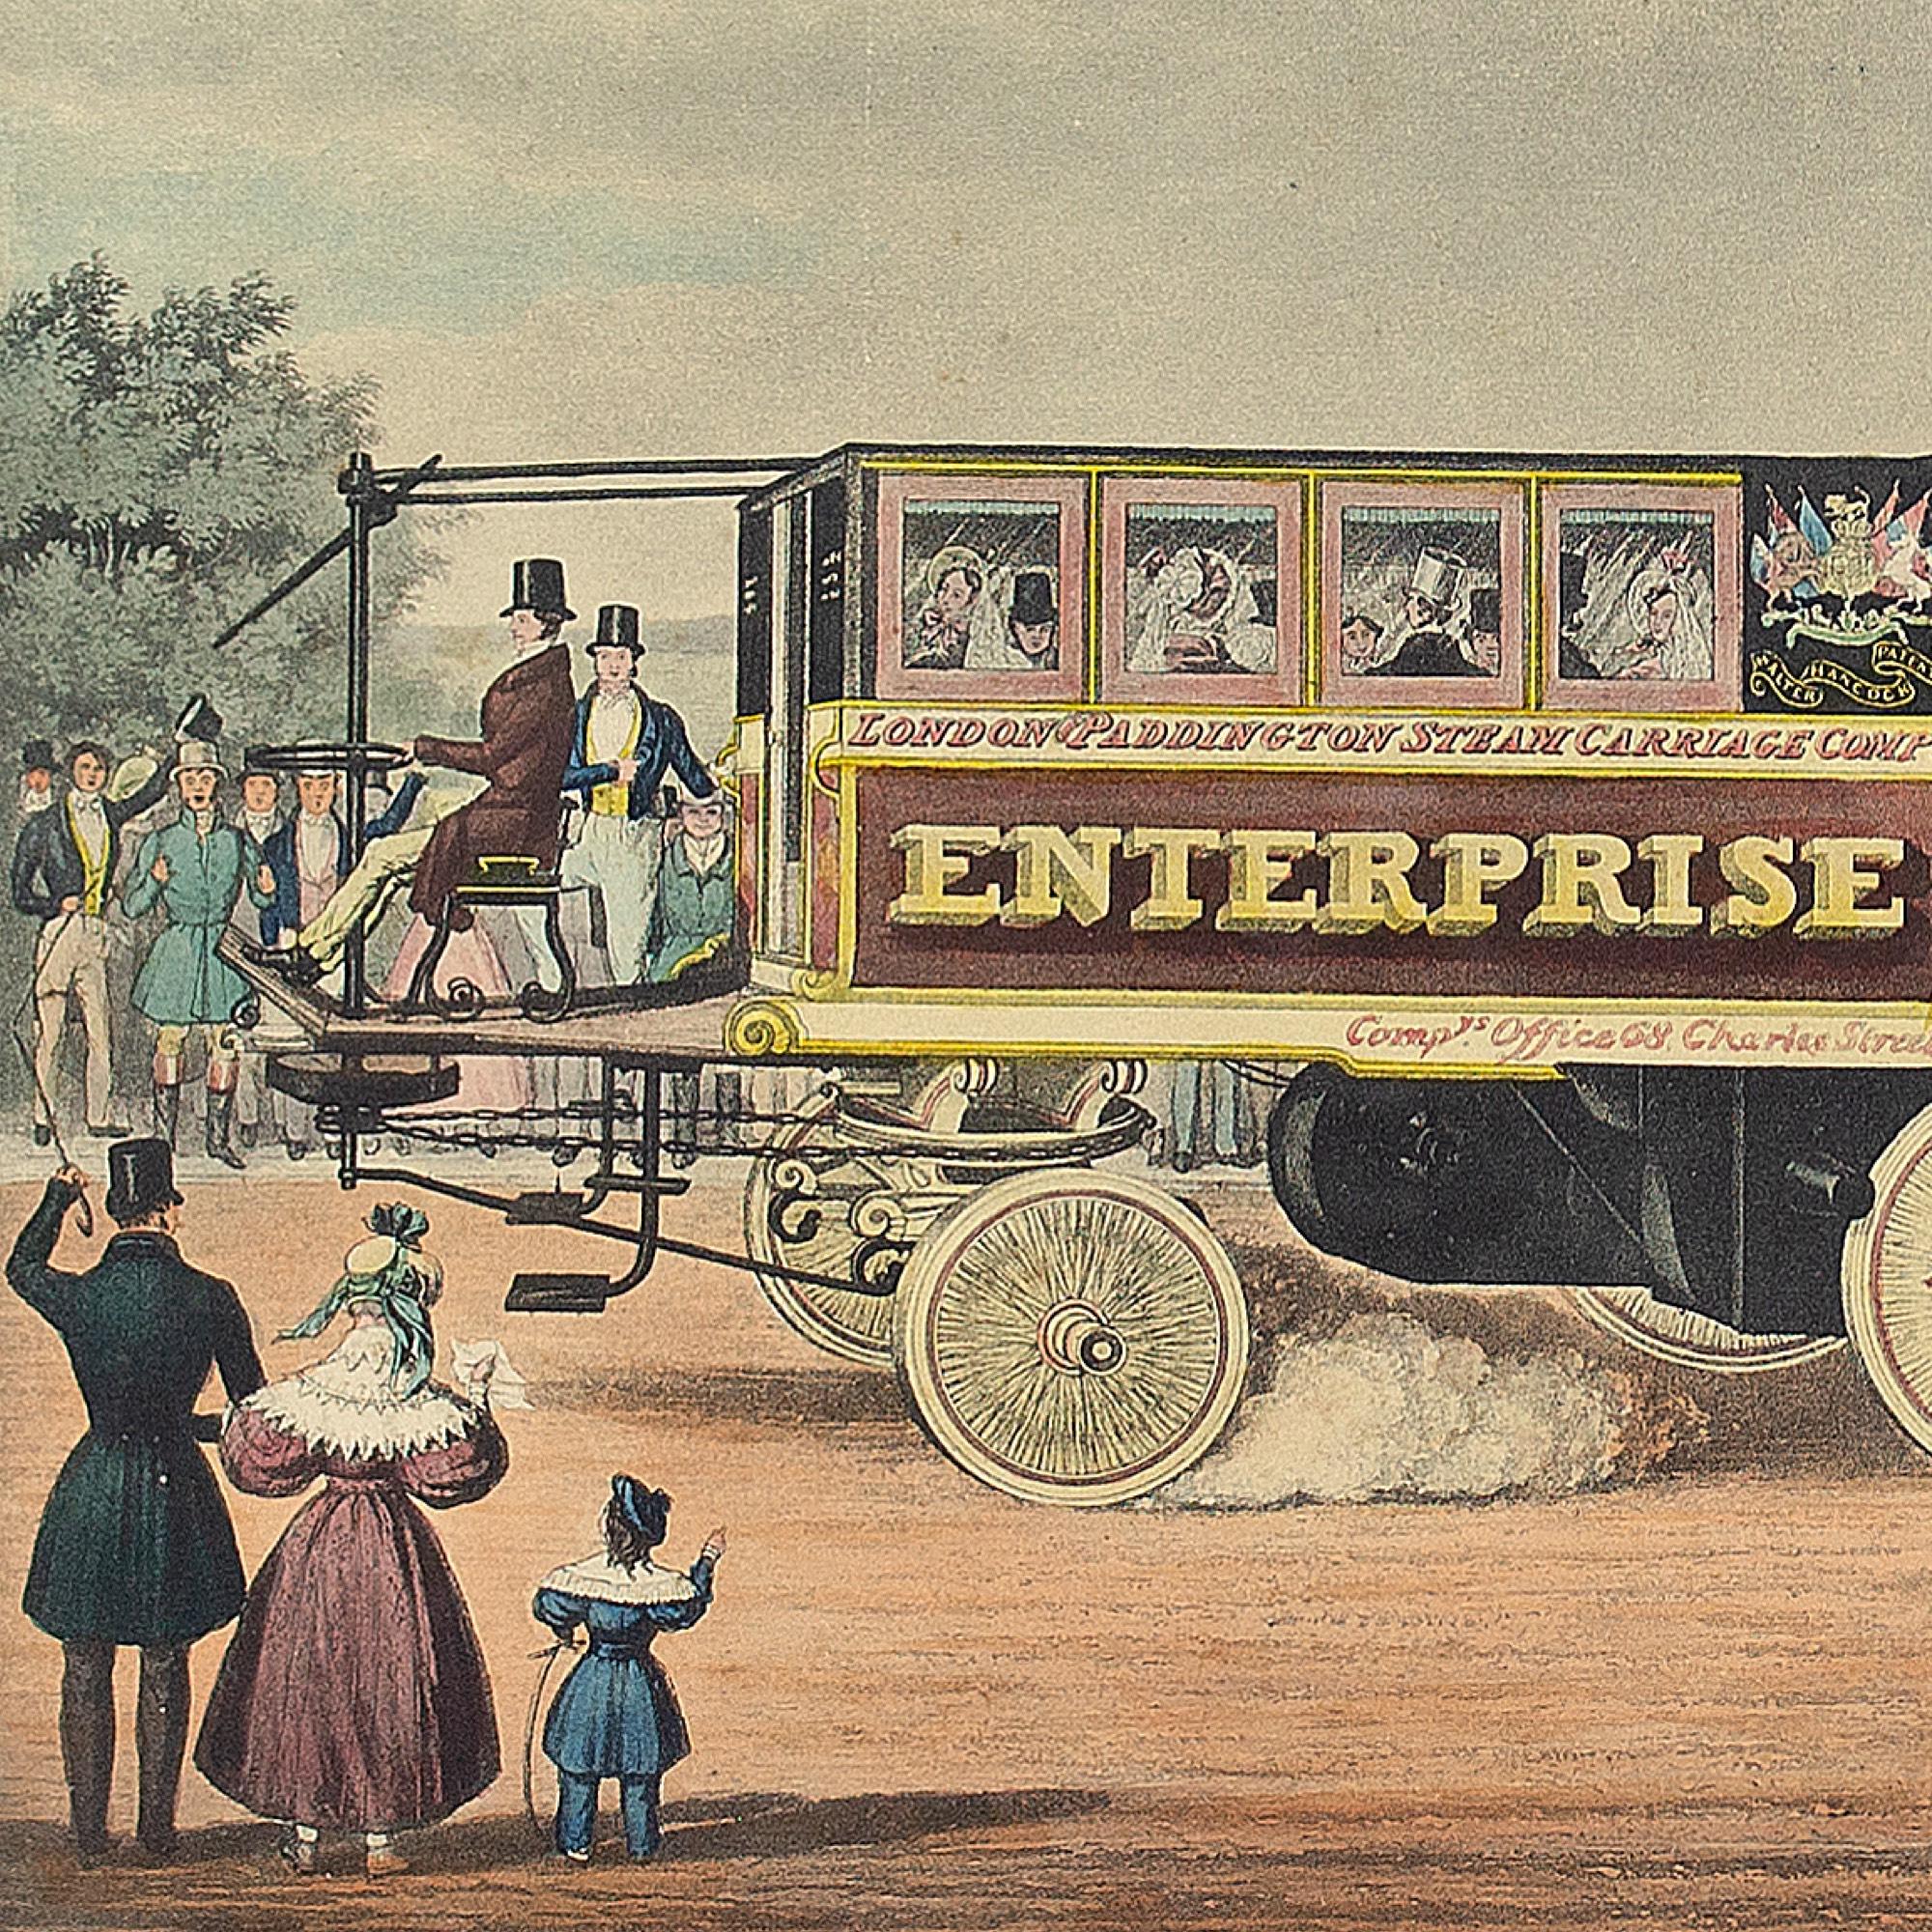 This charming mid-19th-century hand-coloured lithograph depicts the ‘Enterprise Steam Omnibus’, the most successful steam carriage of its period.

In the early 19th century, long-distance travel was predominantly undertaken by horse-drawn carriages.